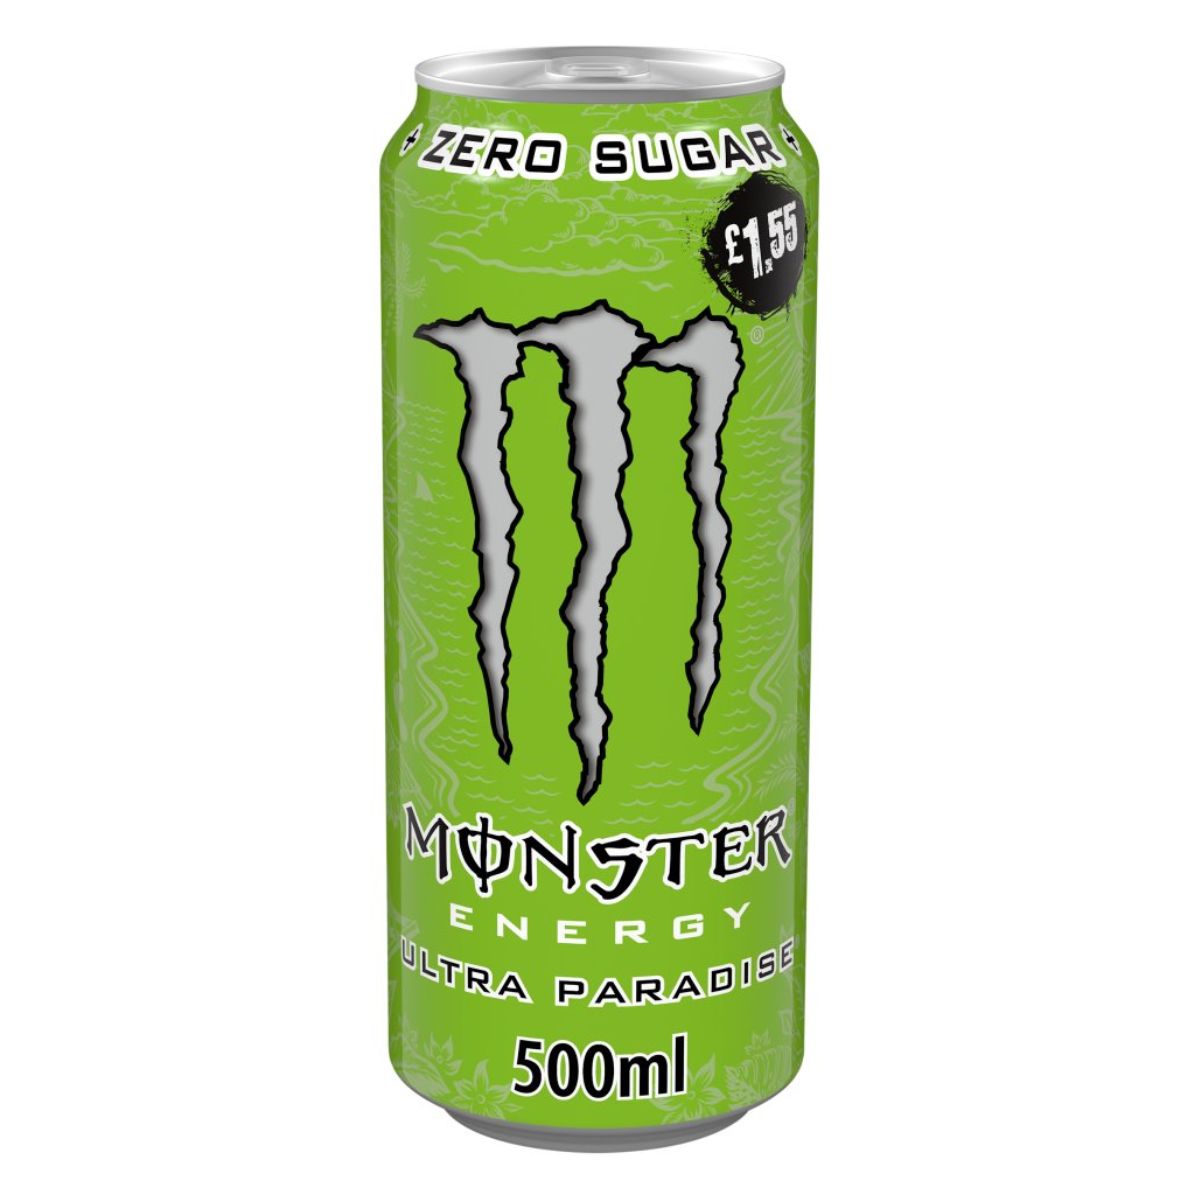 A can of Monster - Energy Drink Ultra Paradise Zero Sugar - 500ml, priced at £1.55, with a green and black design.